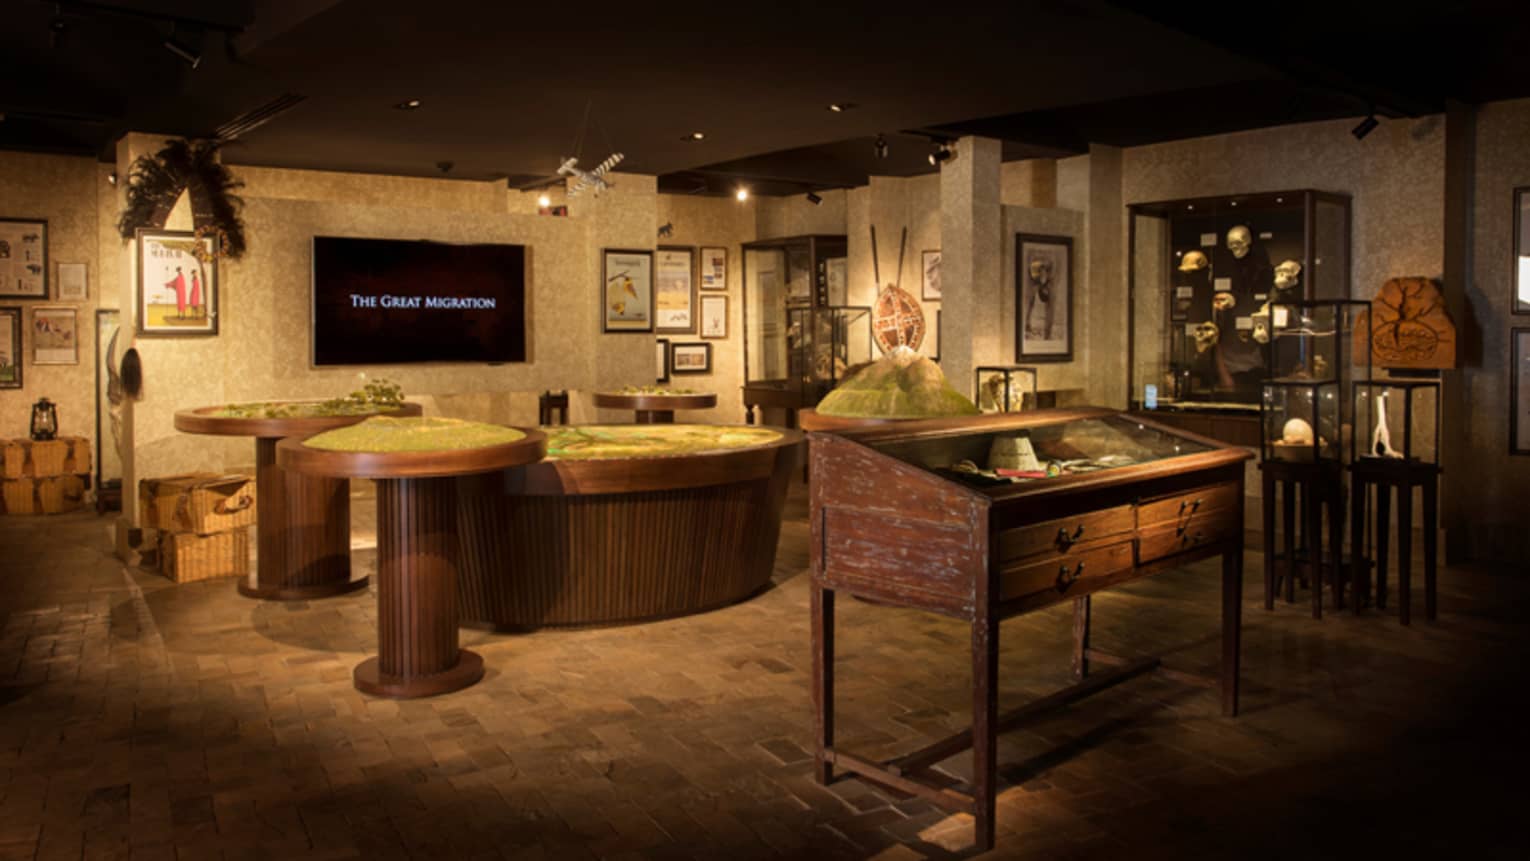 Wide shot of The Great Migration exhibit room with model tables, screen, displays